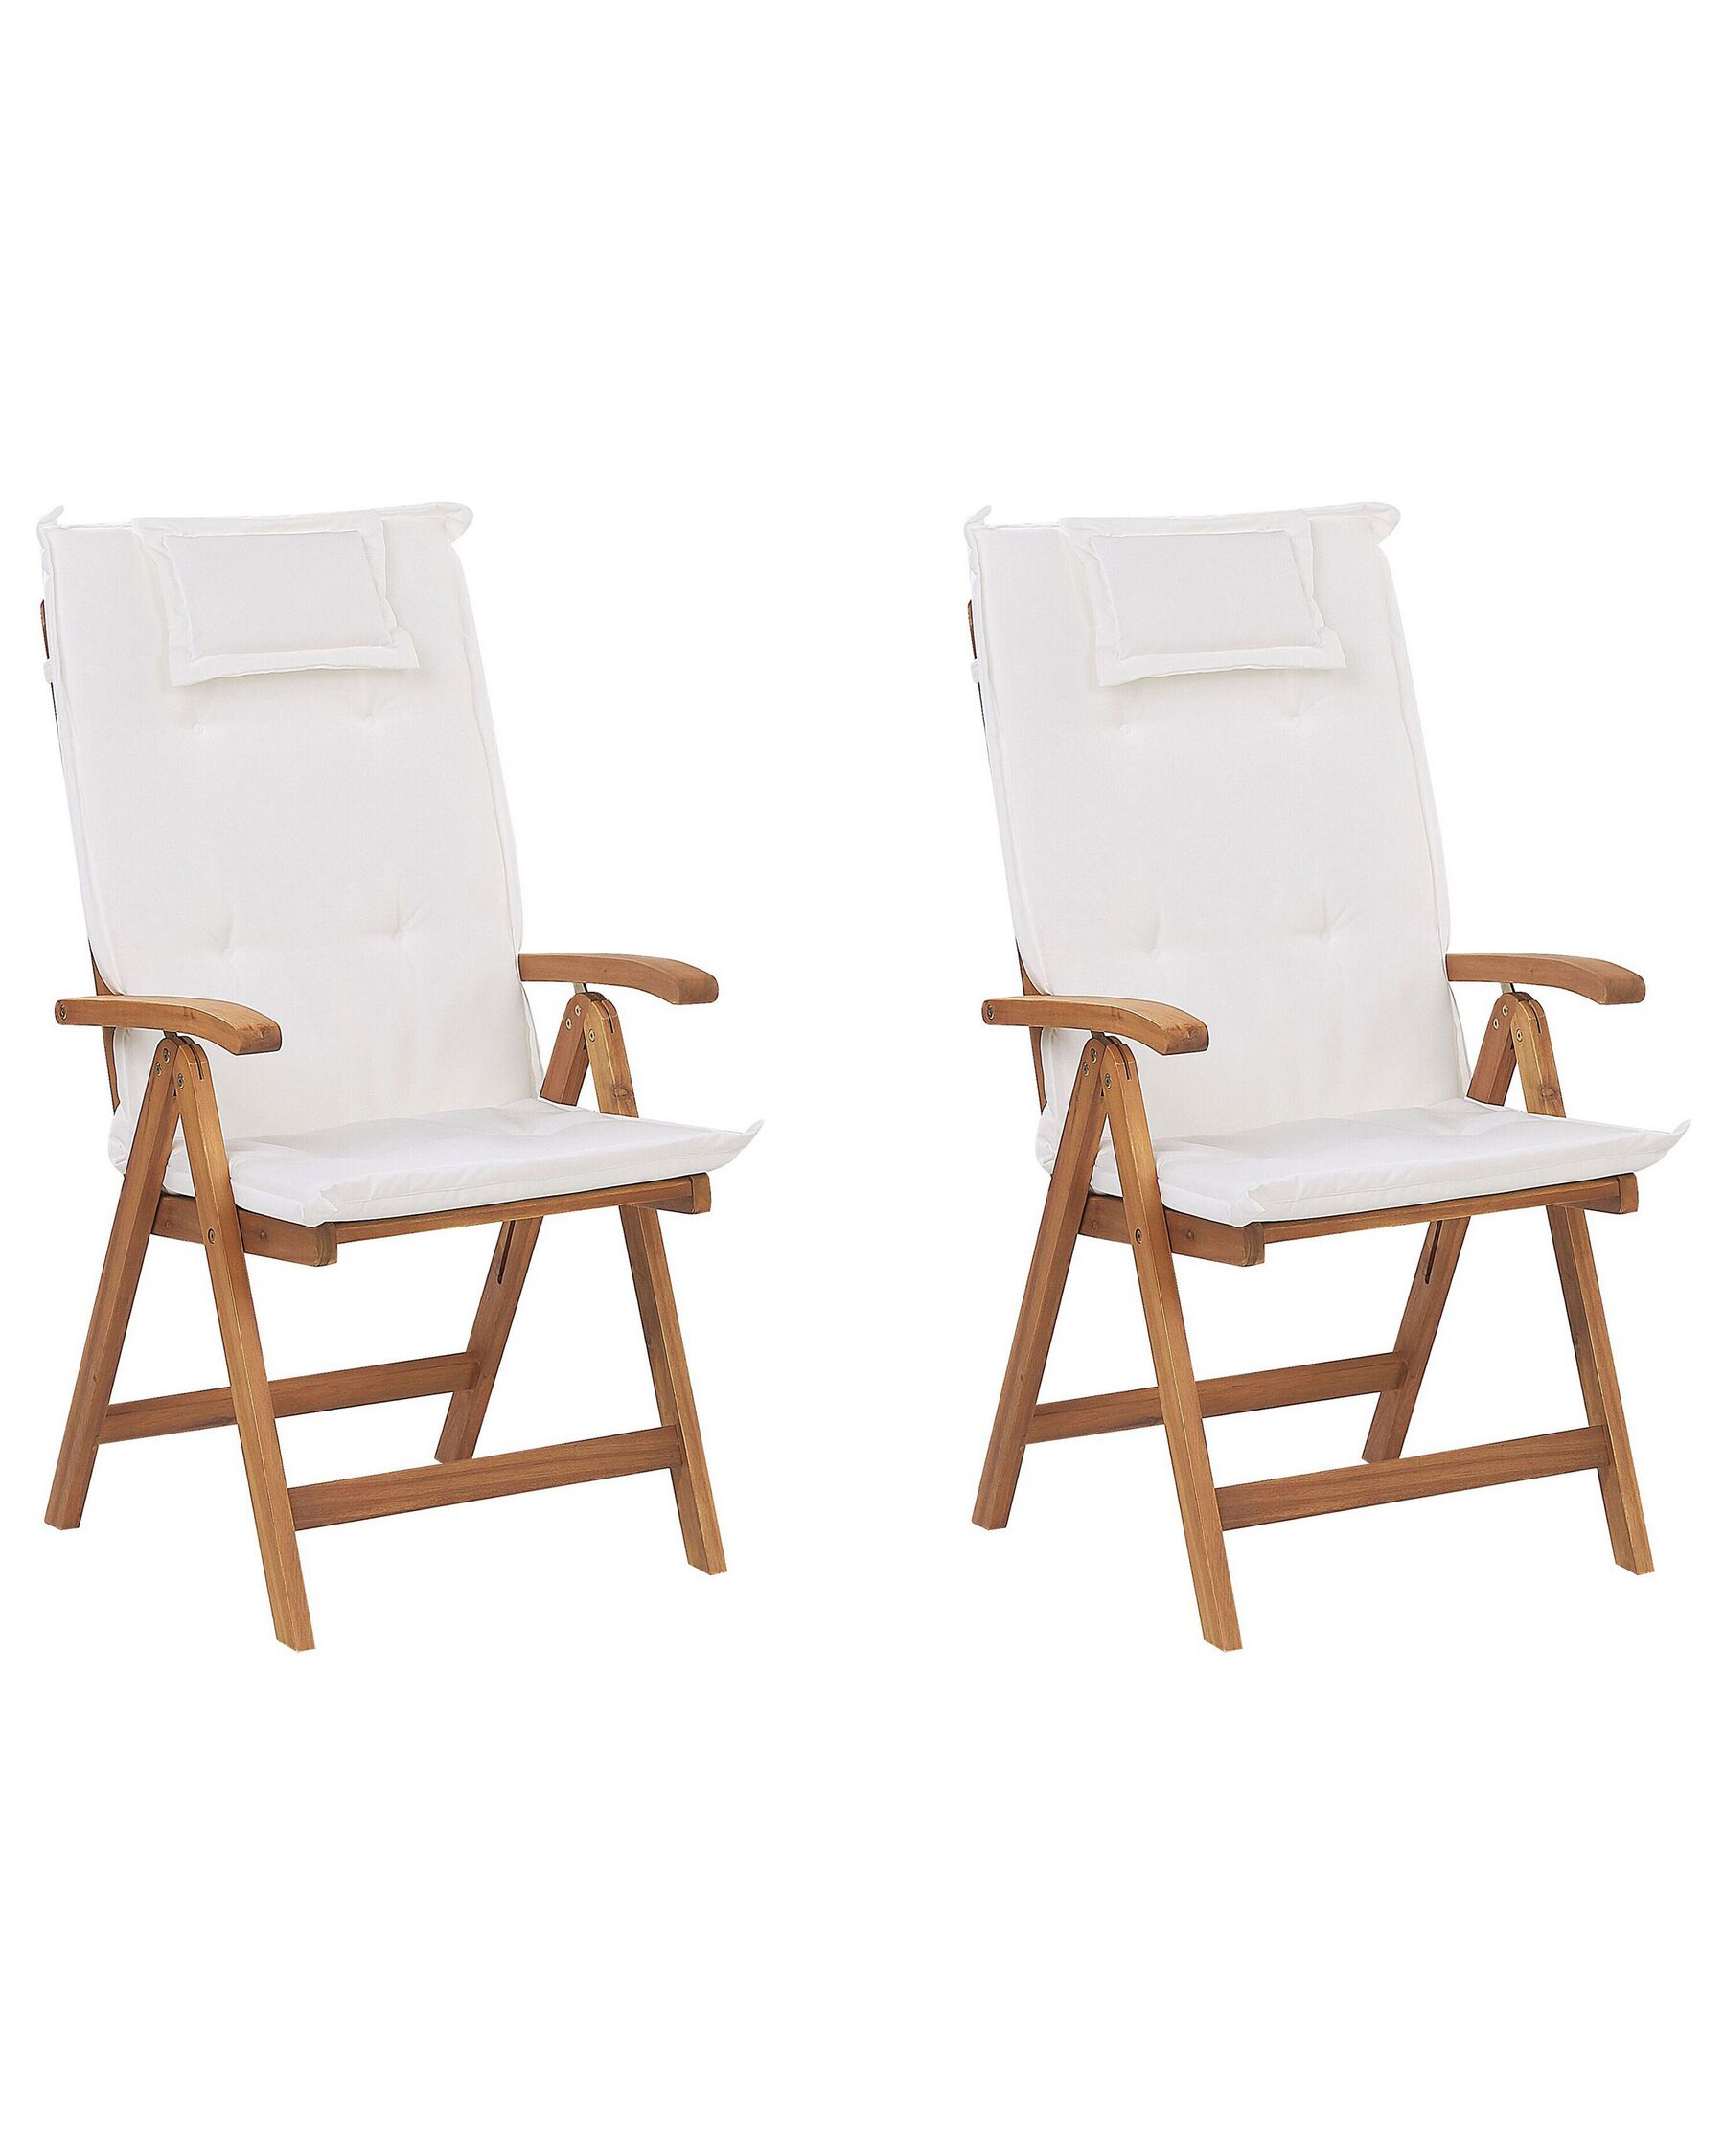 Set of 2 Acacia Wood Garden Folding Chairs with Off-White Cushions JAVA_788327